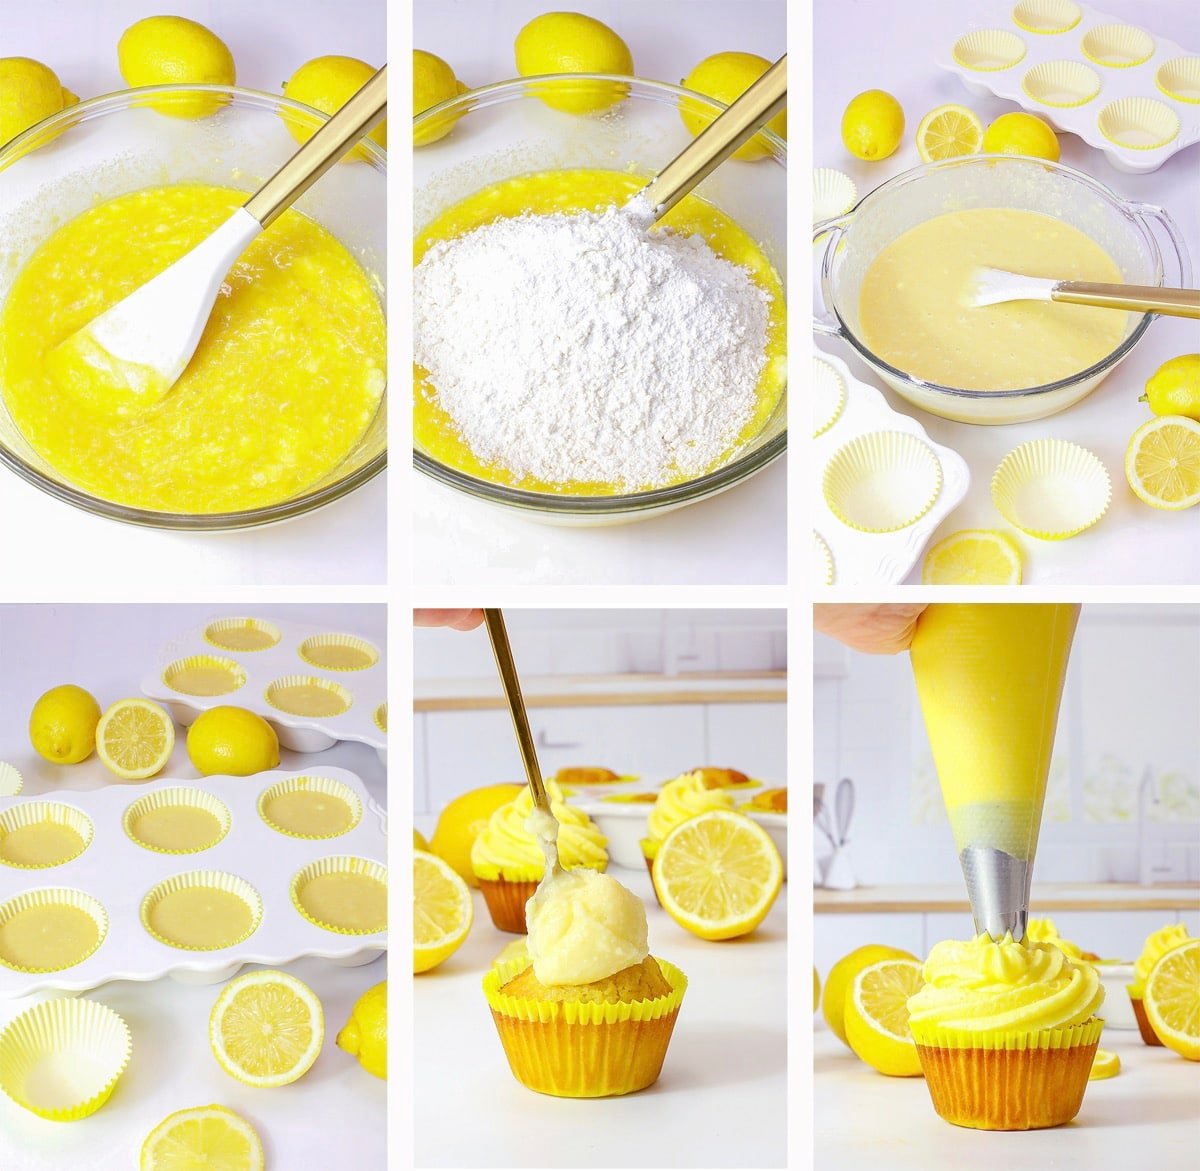 collage of images showing how to make lemon cupcakes